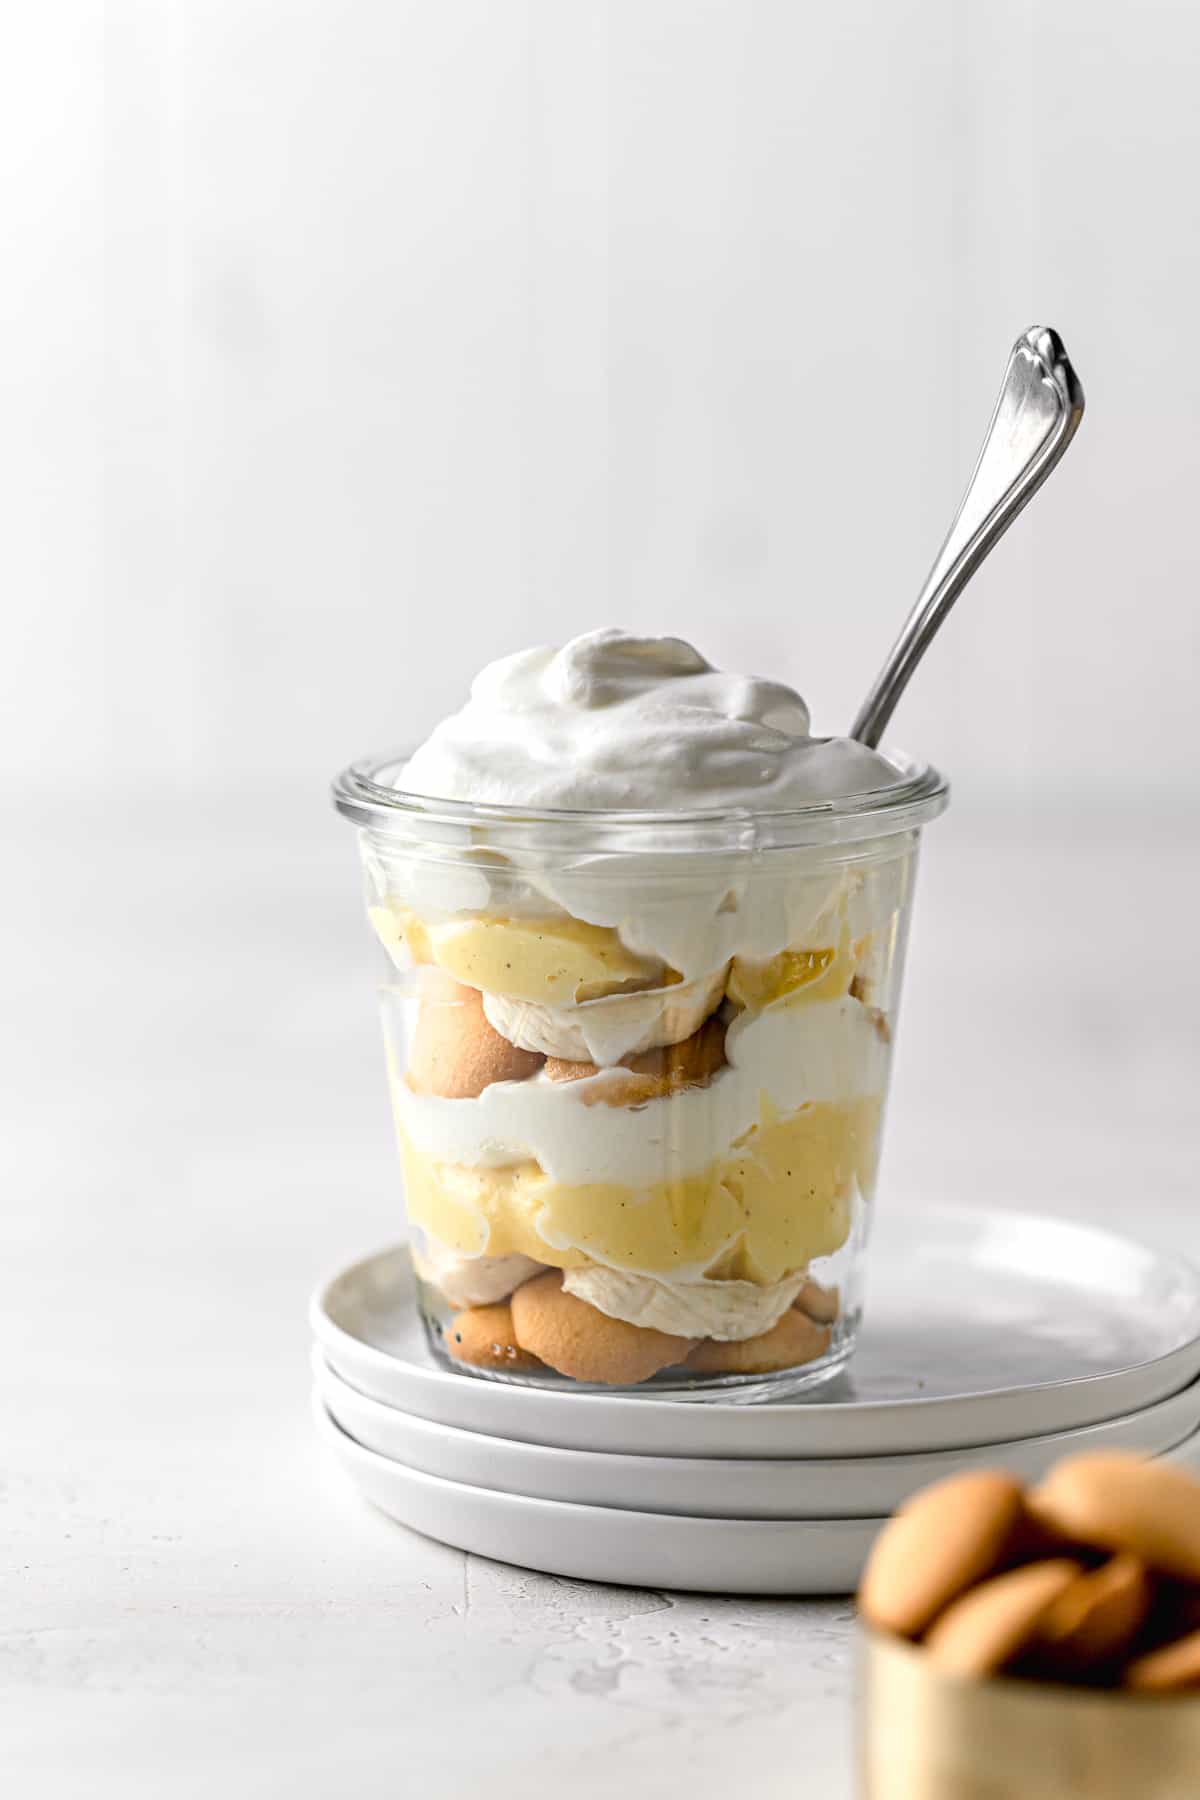 banana pudding jar with spoon on top of stacked plates.